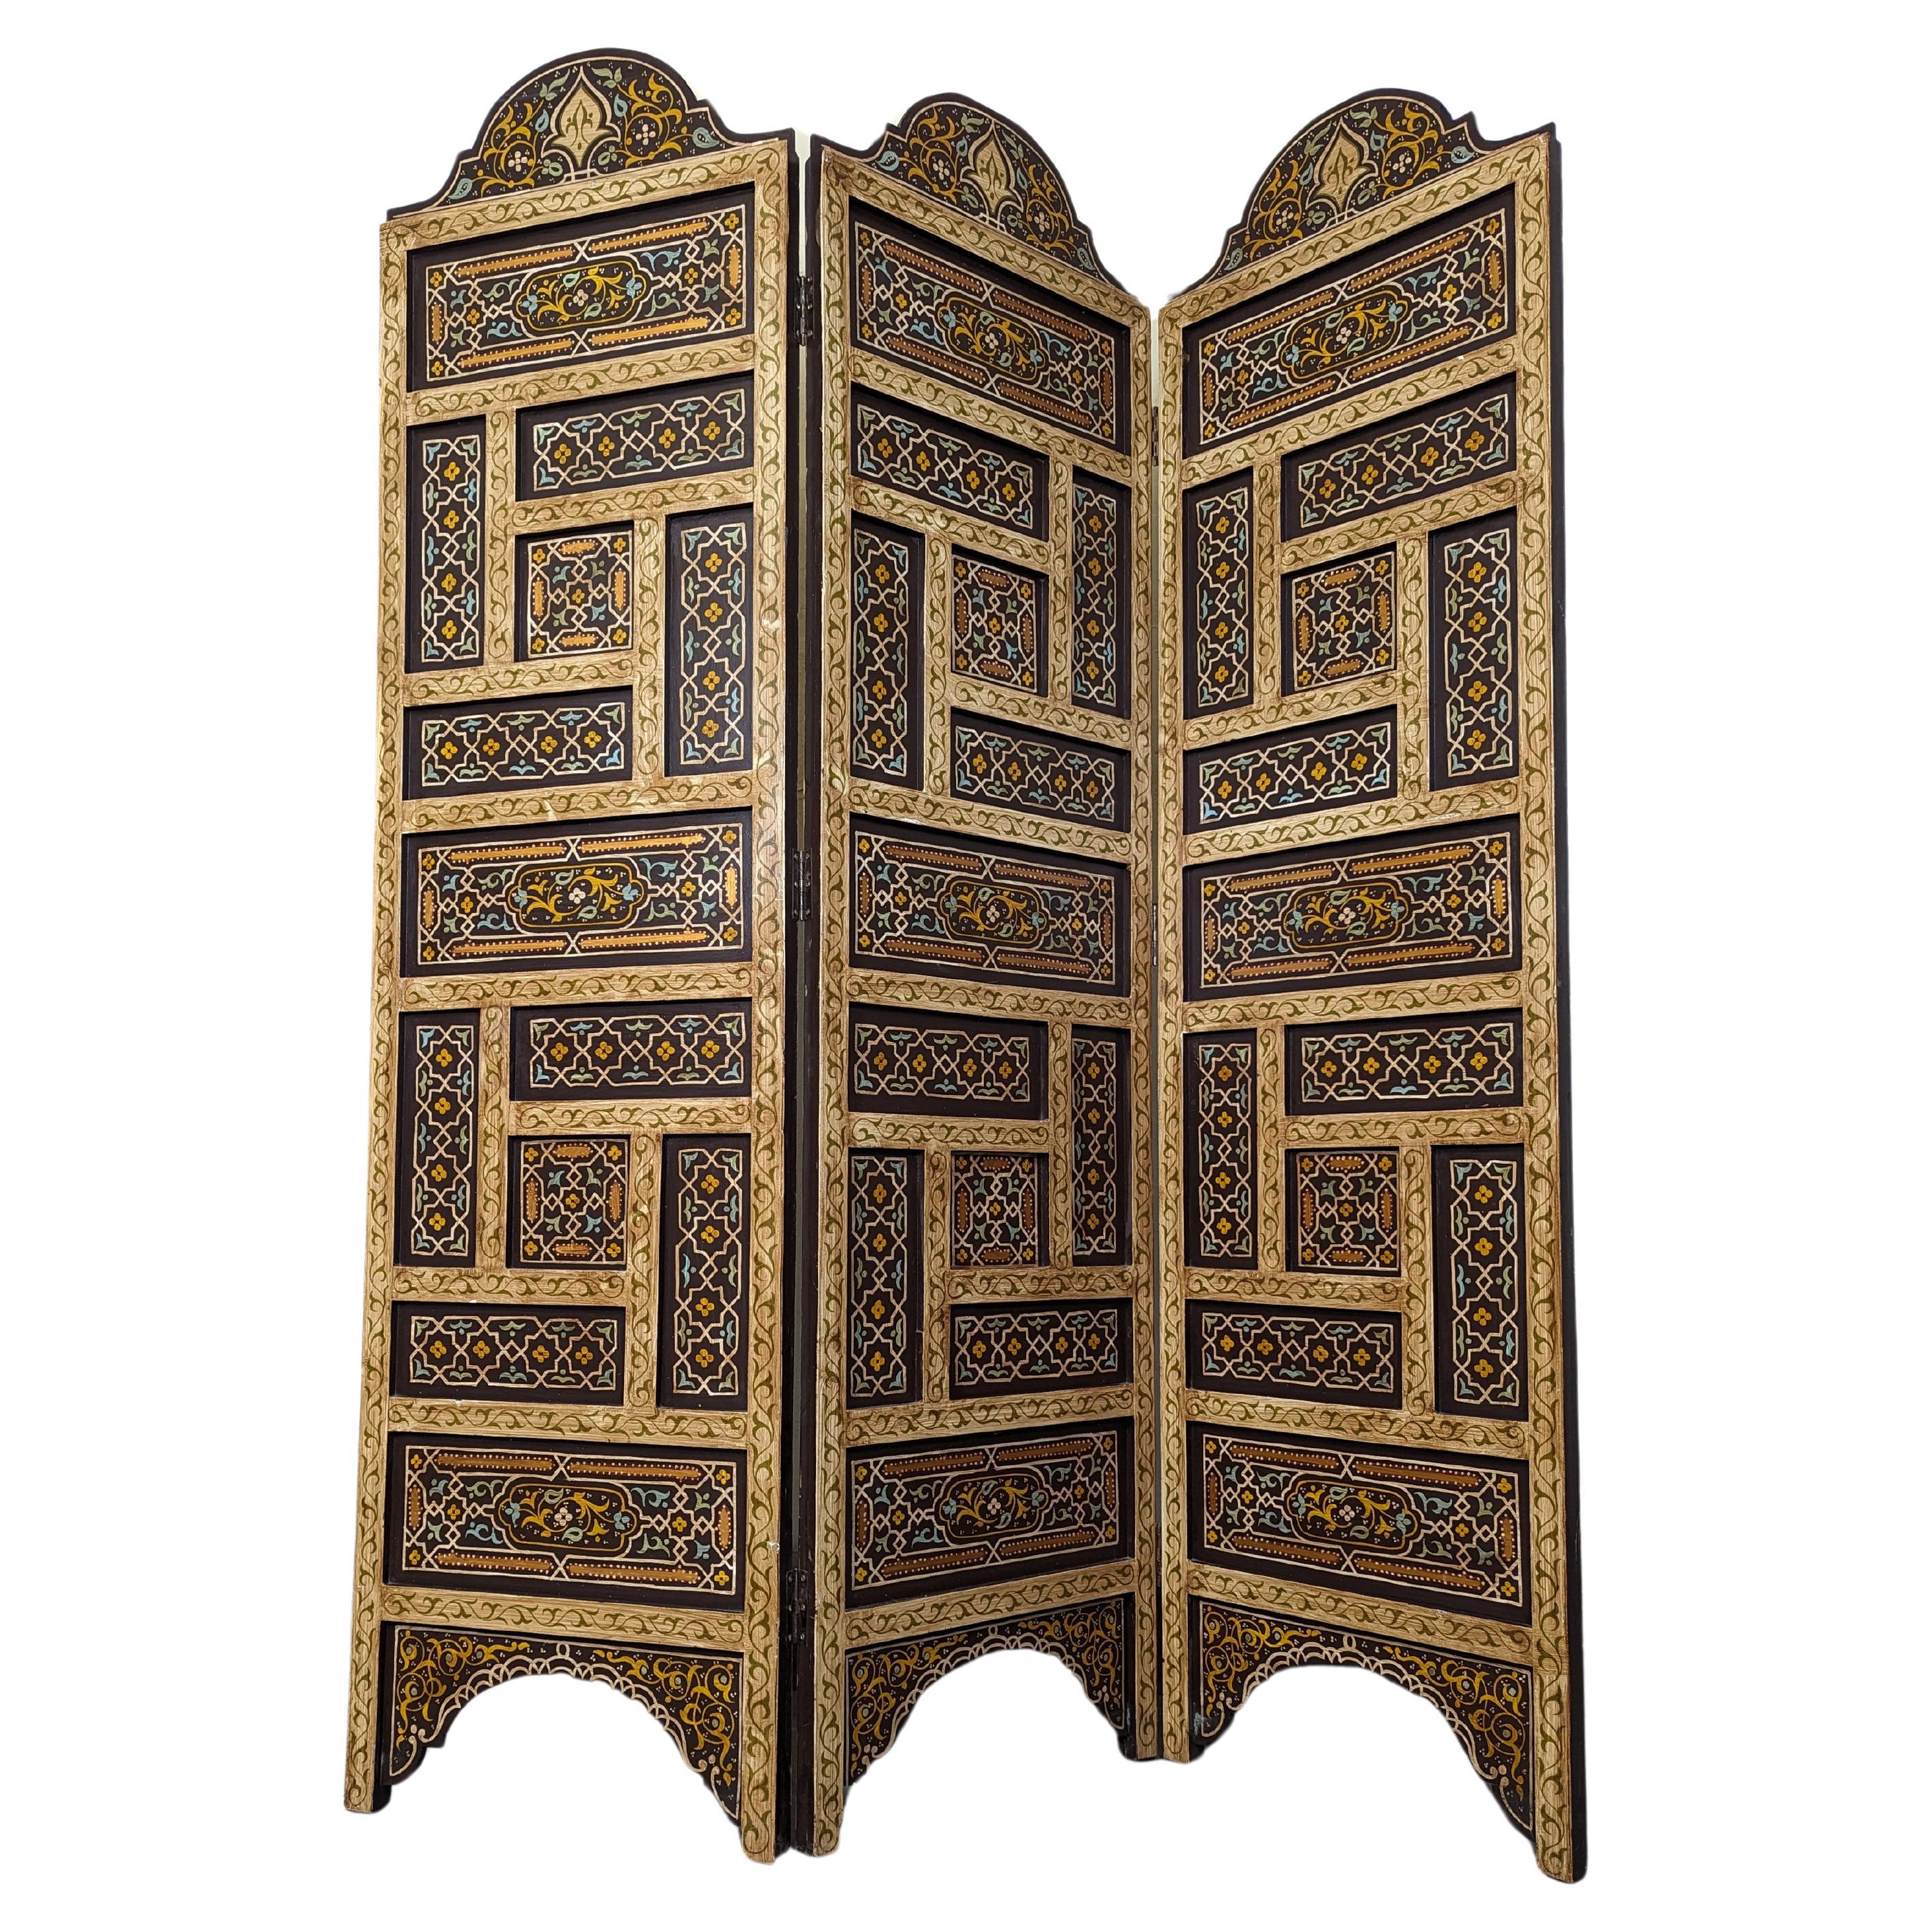 3 Panel Hand Painted Moroccan Style Wood Screen Divider For Sale